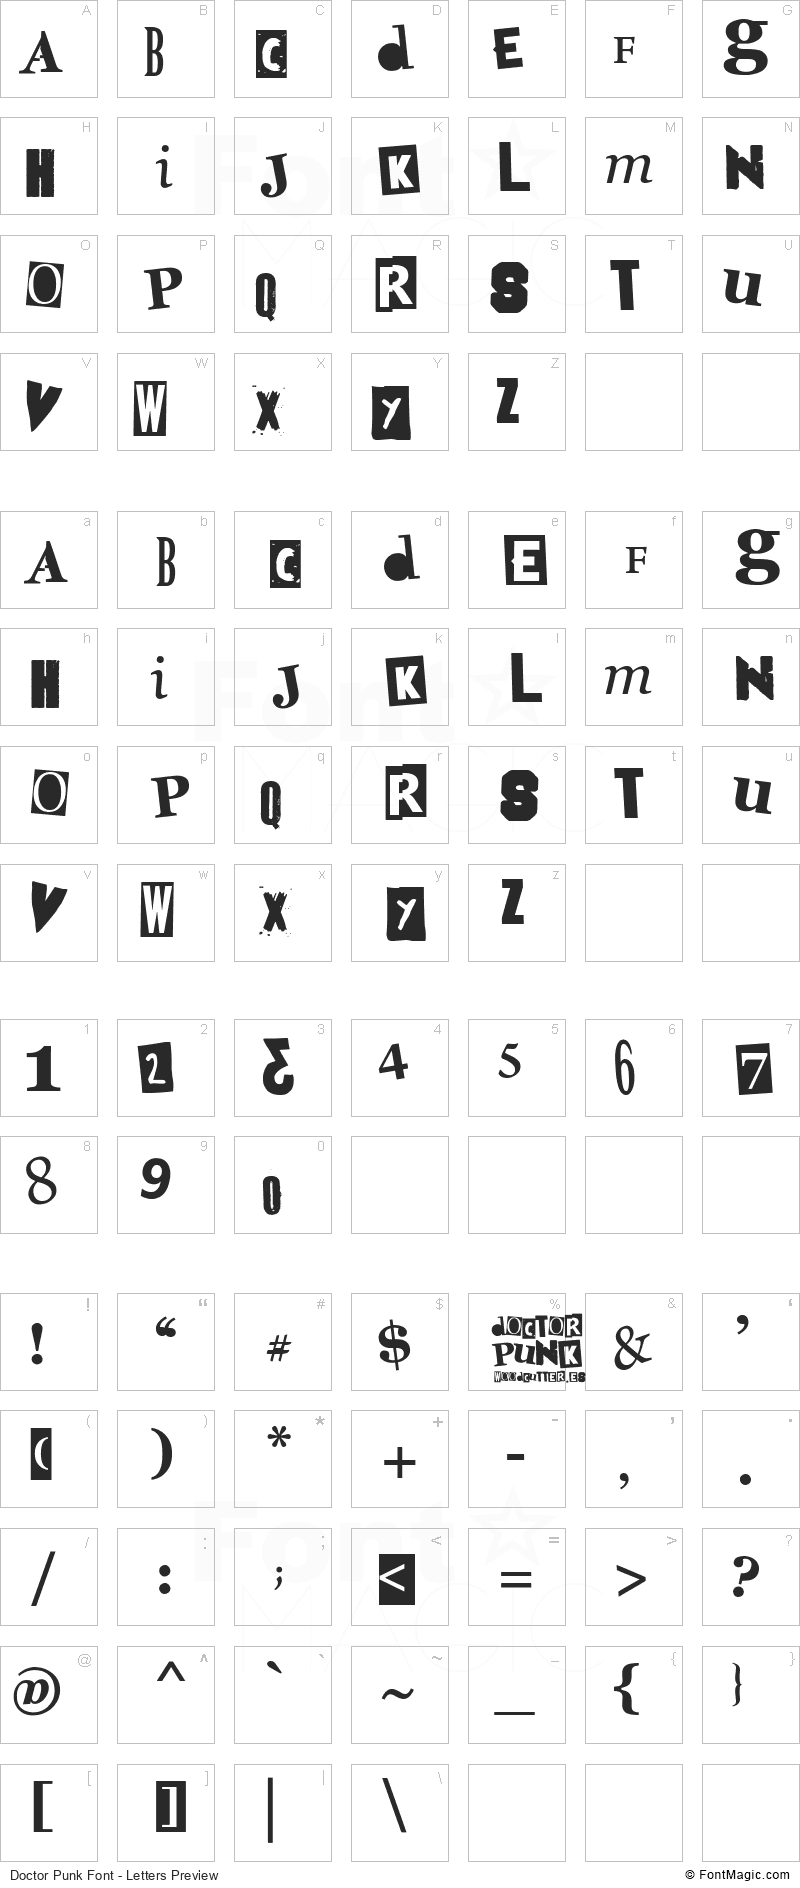 Doctor Punk Font - All Latters Preview Chart